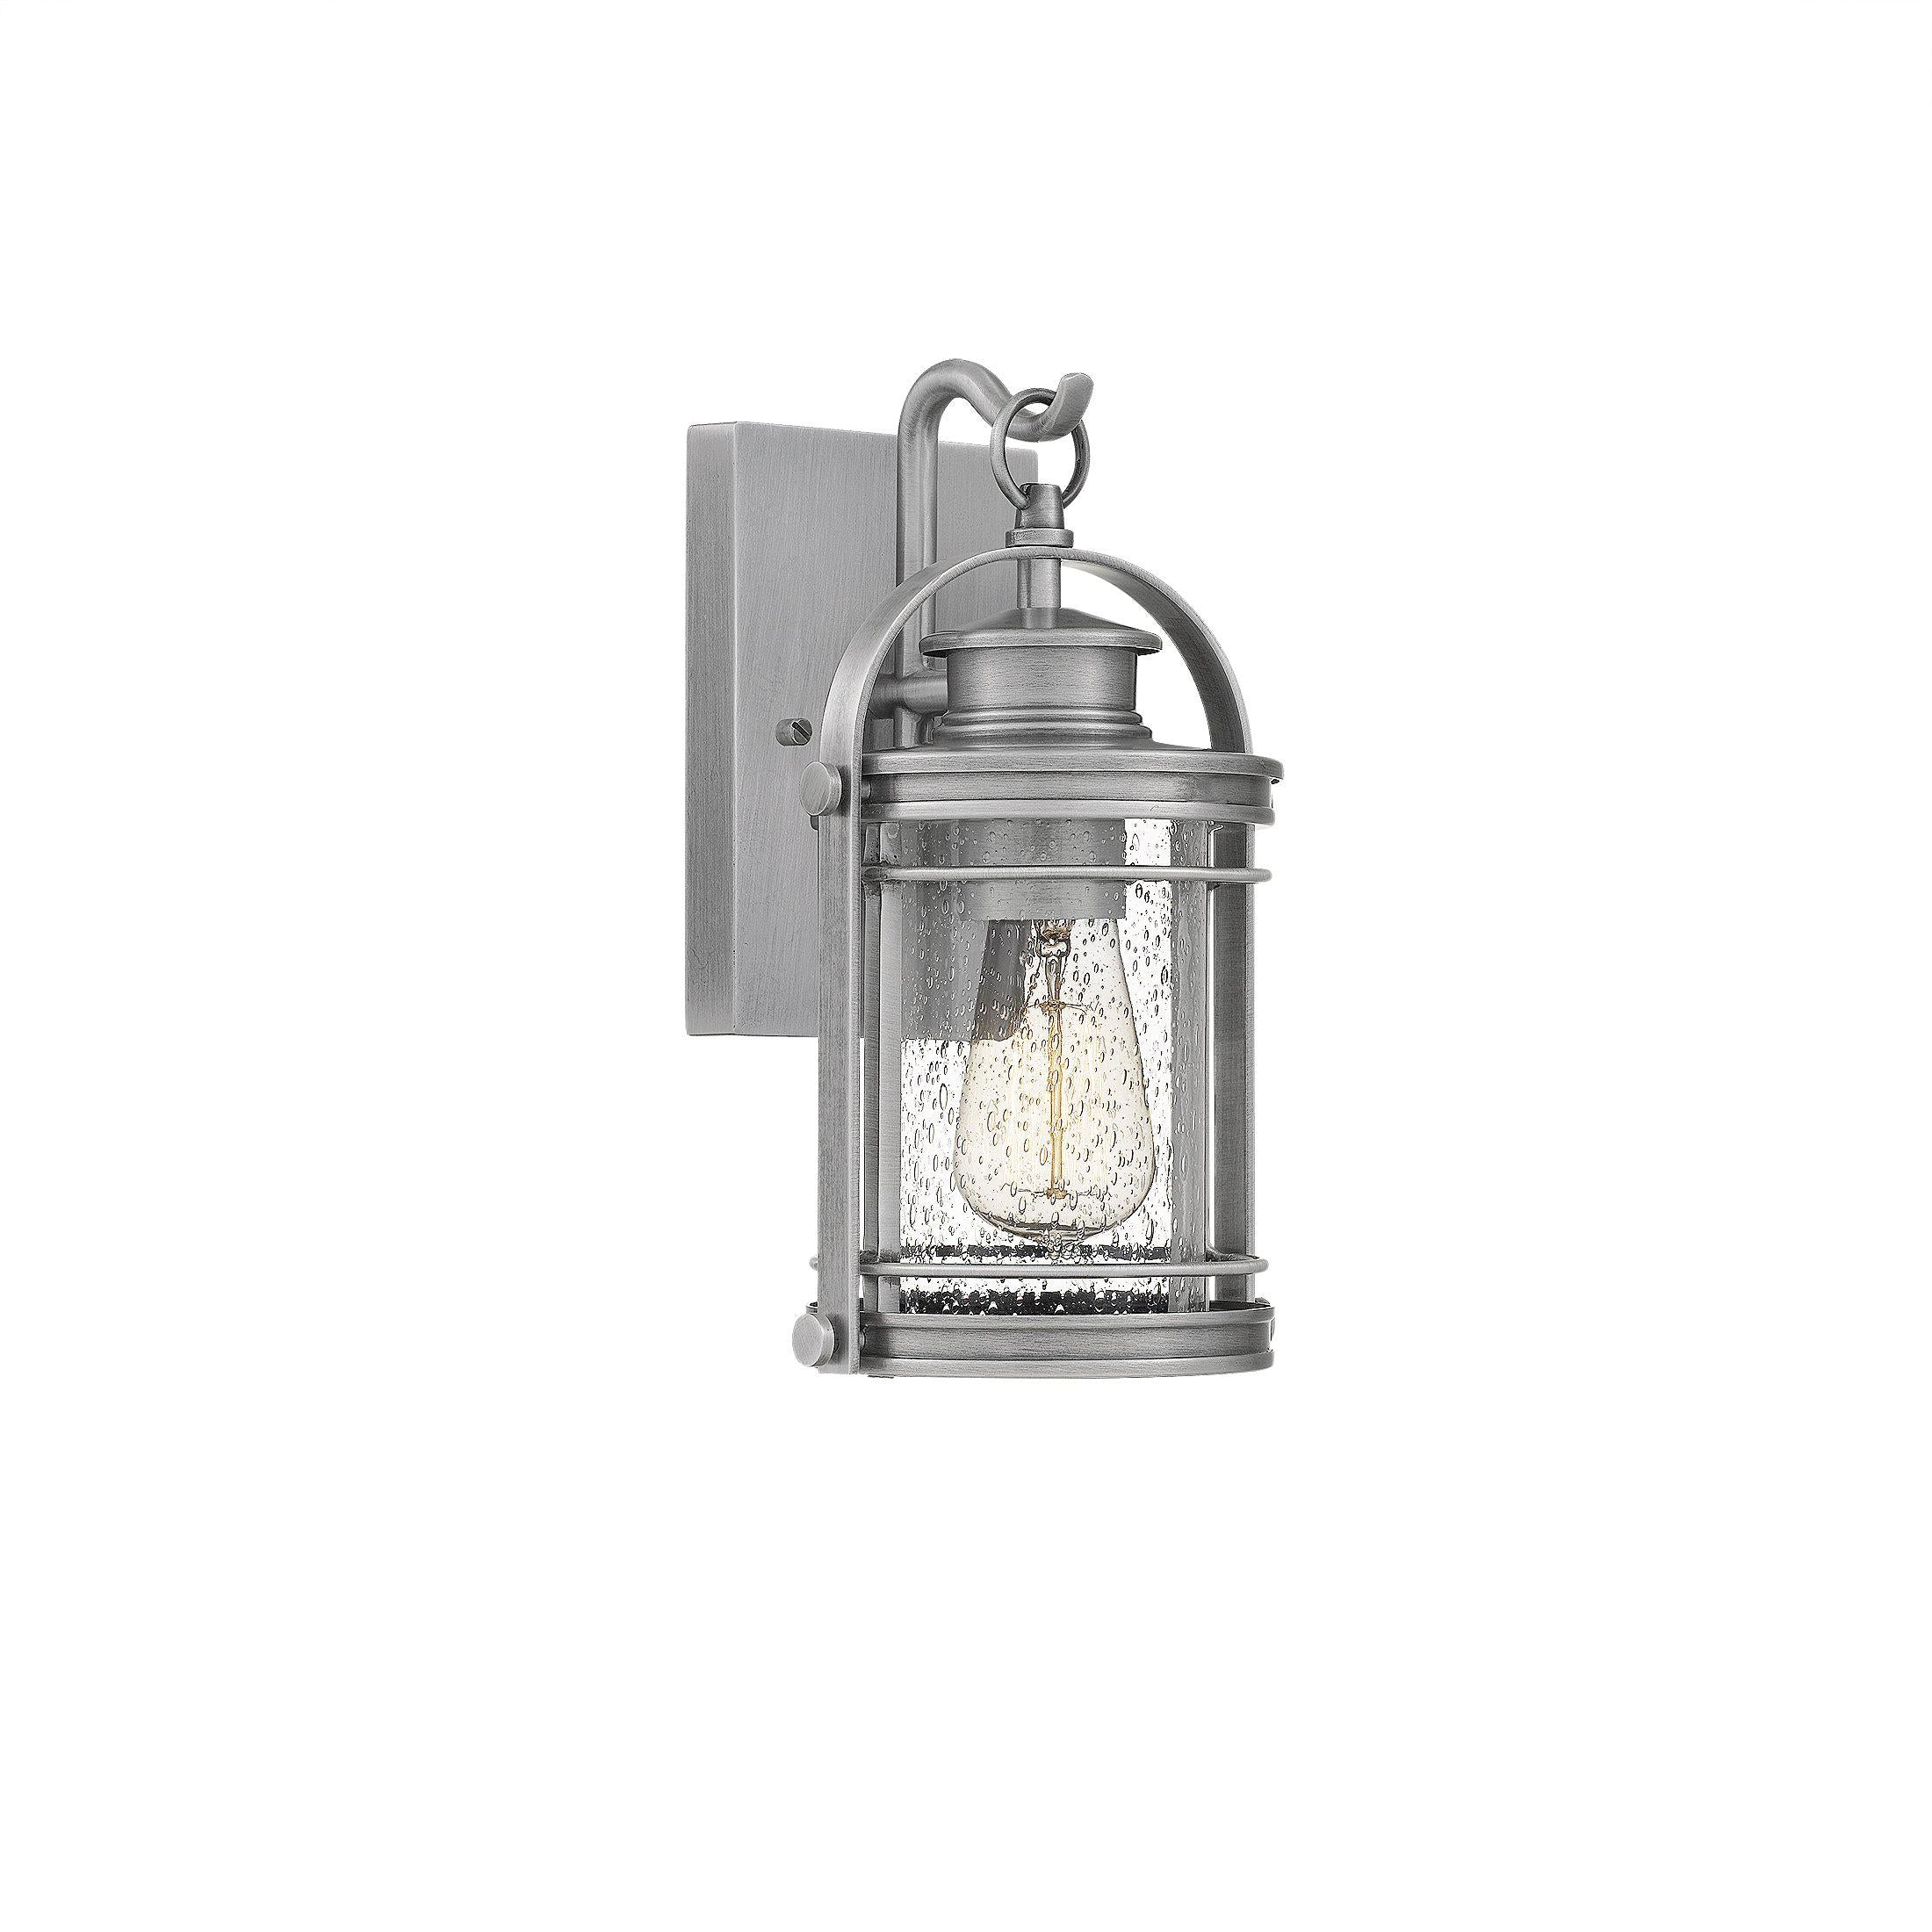 Quoizel Booker Outdoor Lantern, Small